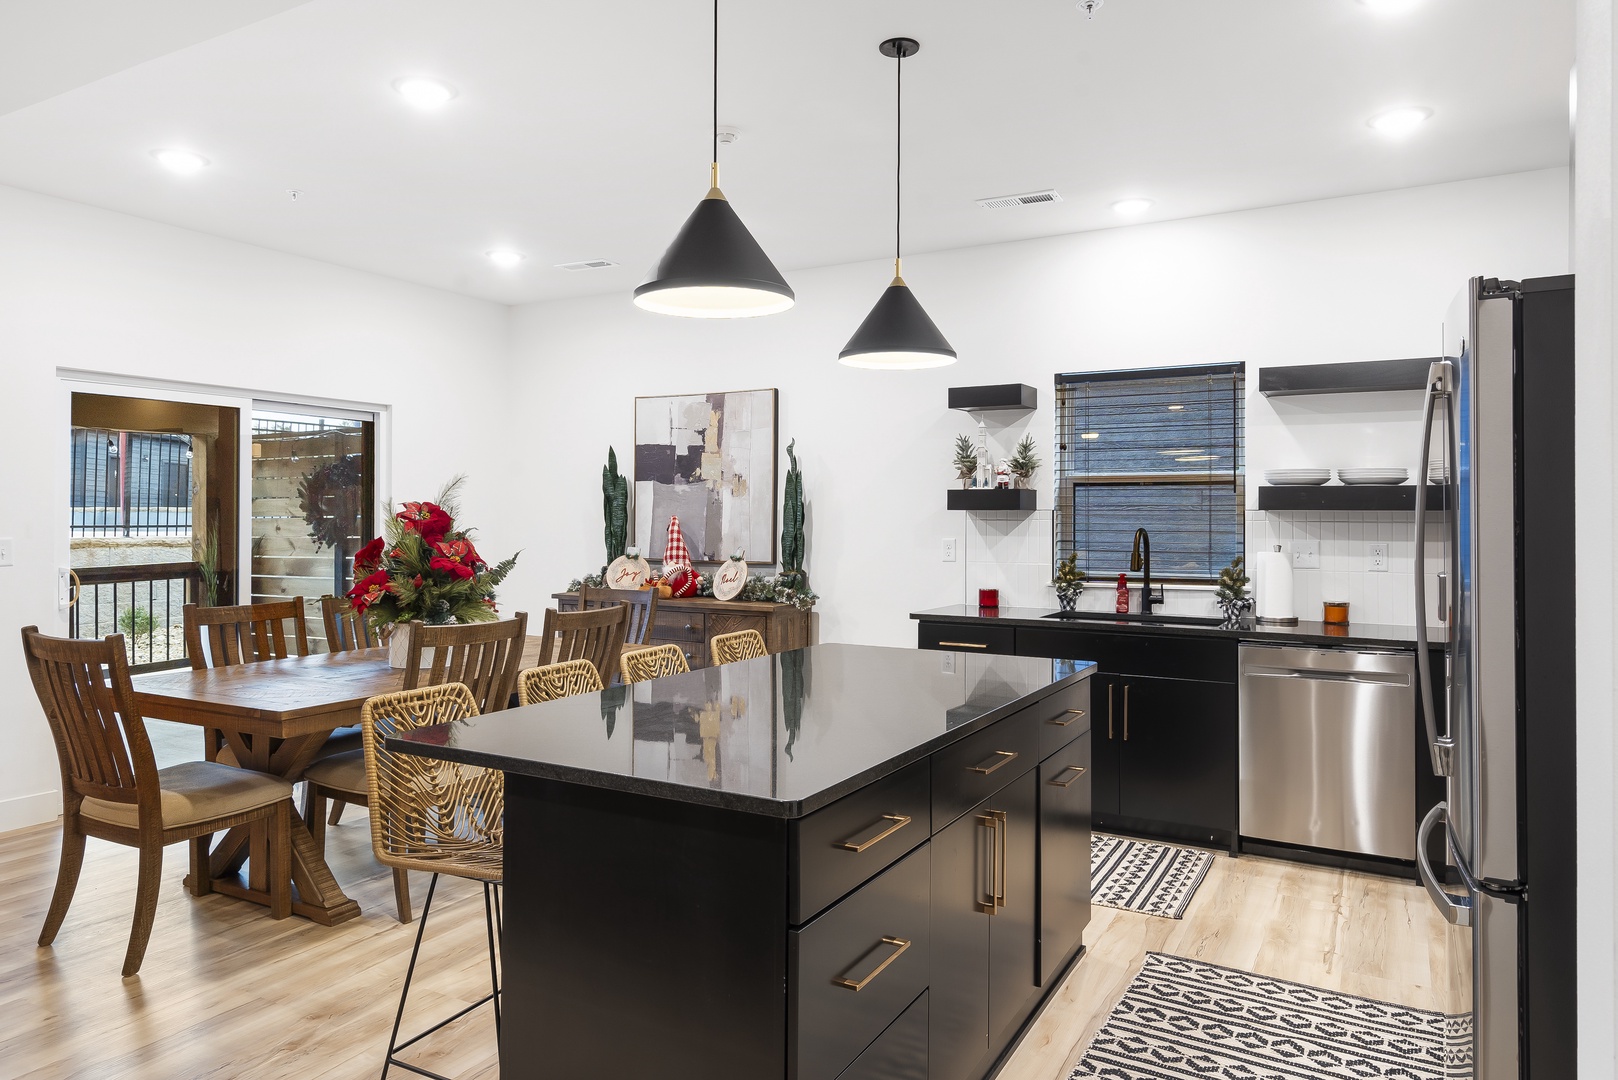 The stylish, spacious kitchen provides ample room and every home comfort